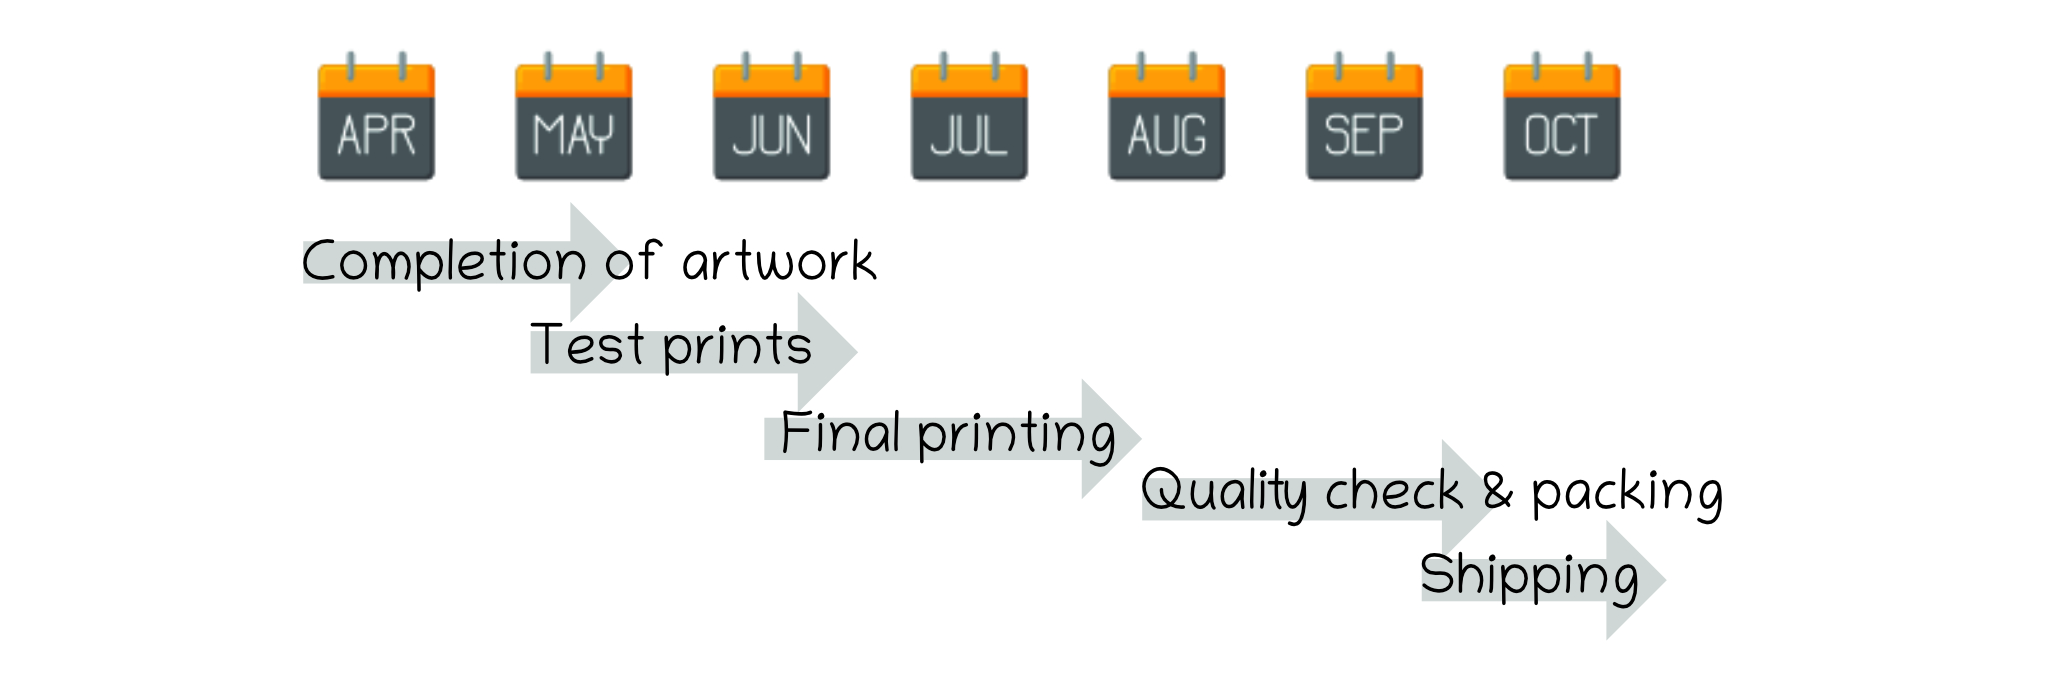 Timeline of events: Apr-May - completion of artwork May-Jun - Test prints Jun-Jul - Final printing Aug-Sep - Quality check & packing Sep-Oct - Shipping